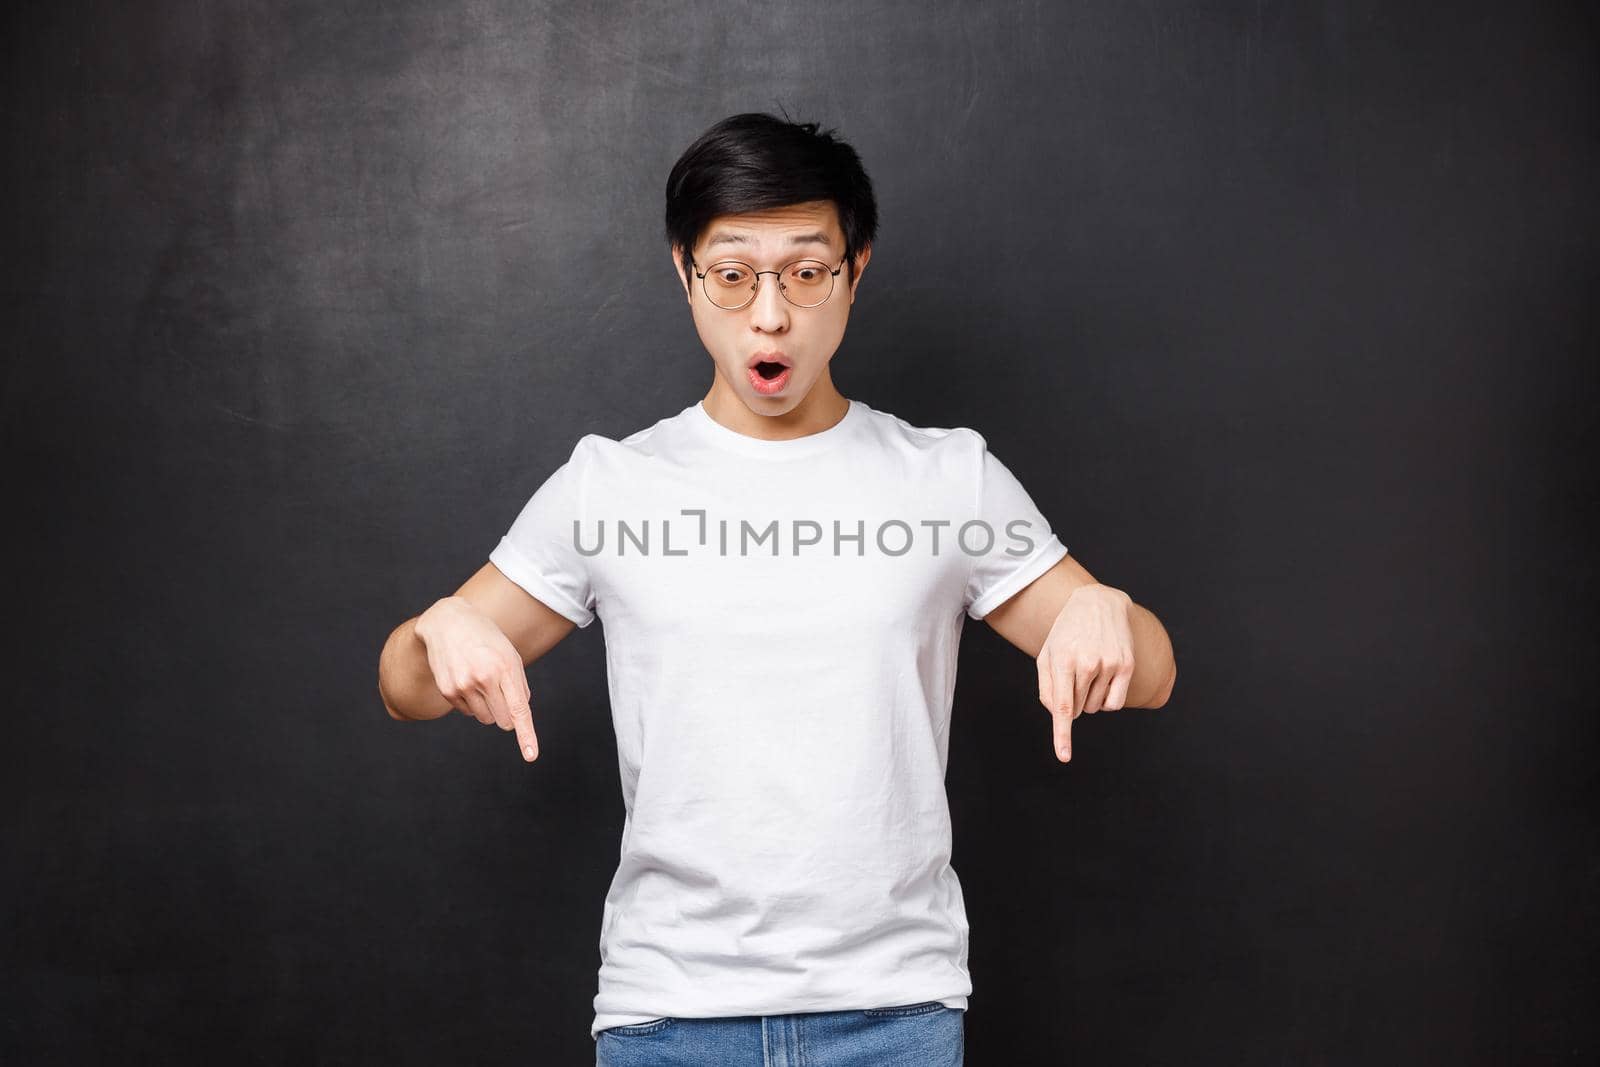 Astonished and amazed speechless asian guy see something shocking and awesome, pointing looking down, folding lips amused say wow, stare impressed at cool product, black background.